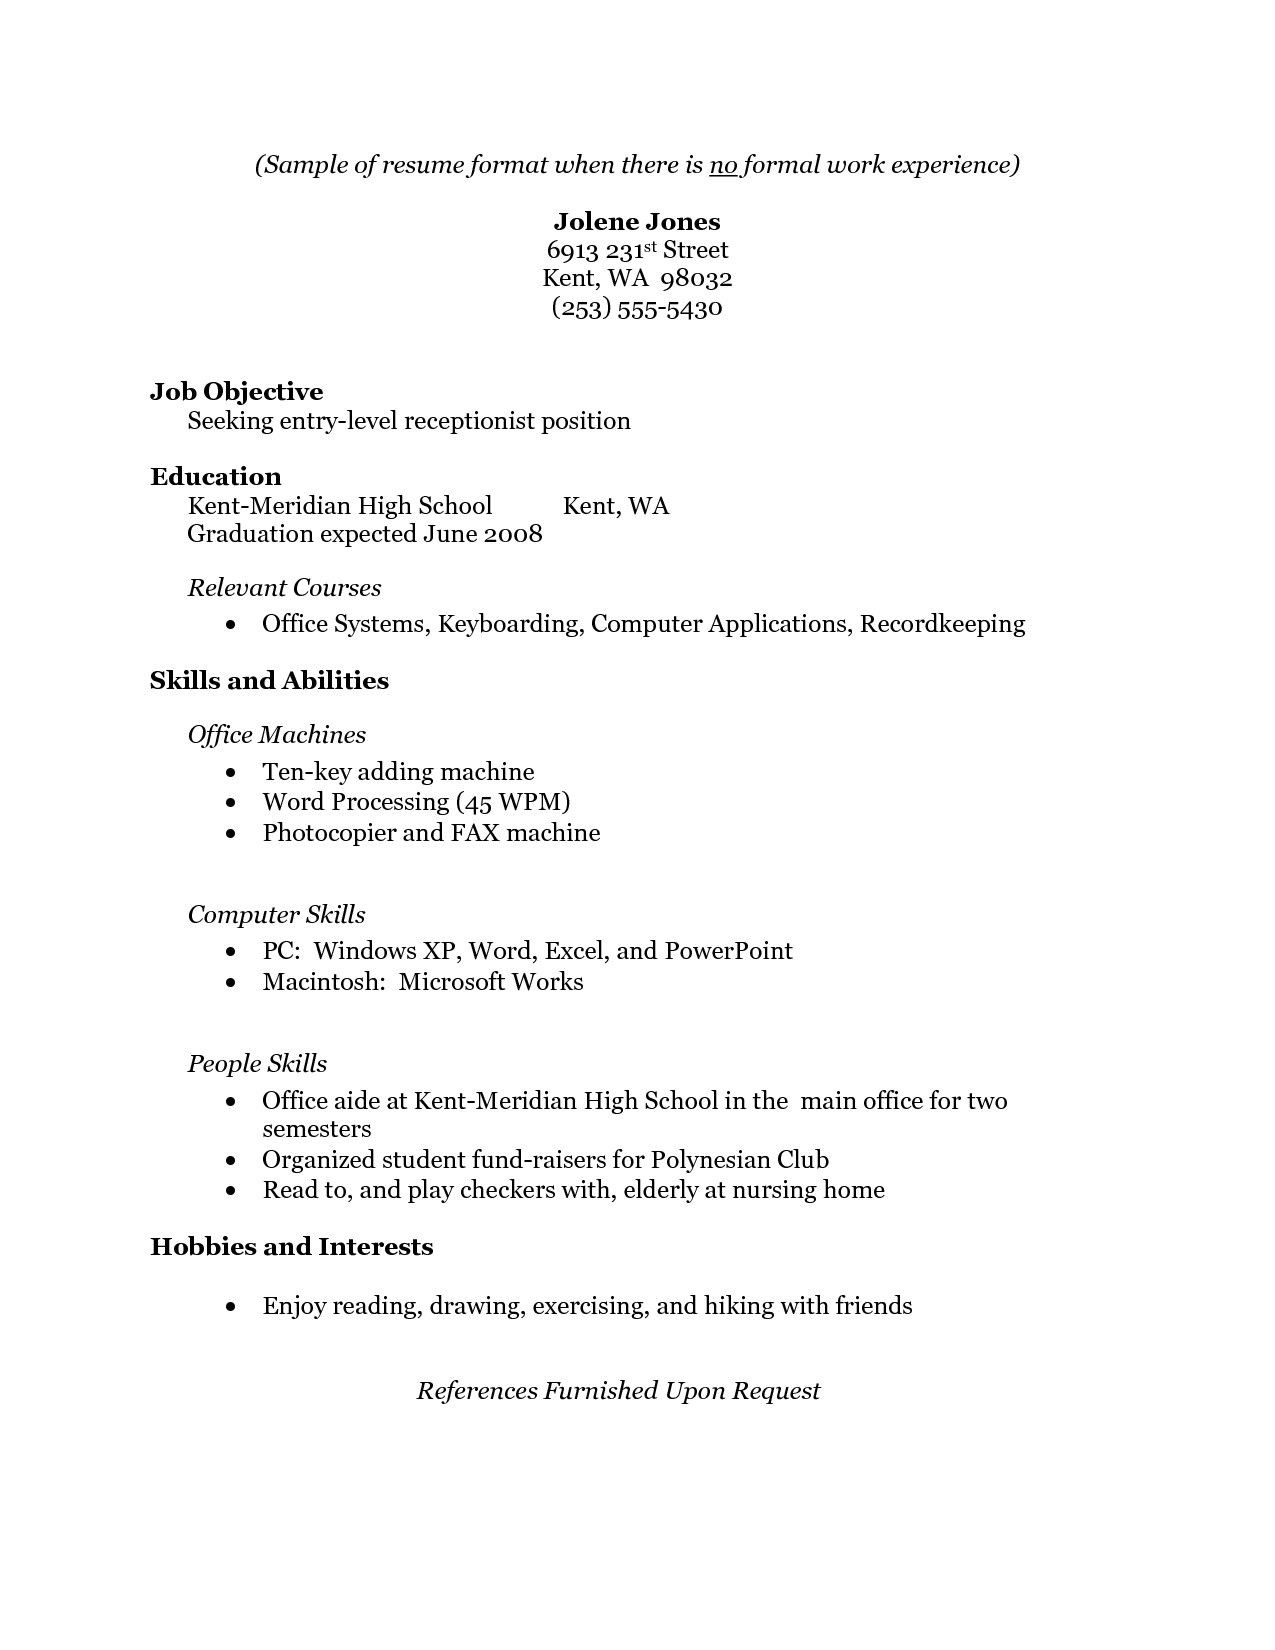 Resume for Beginners with No Experience Sample Free Resume Templates No Work Experience #experience …